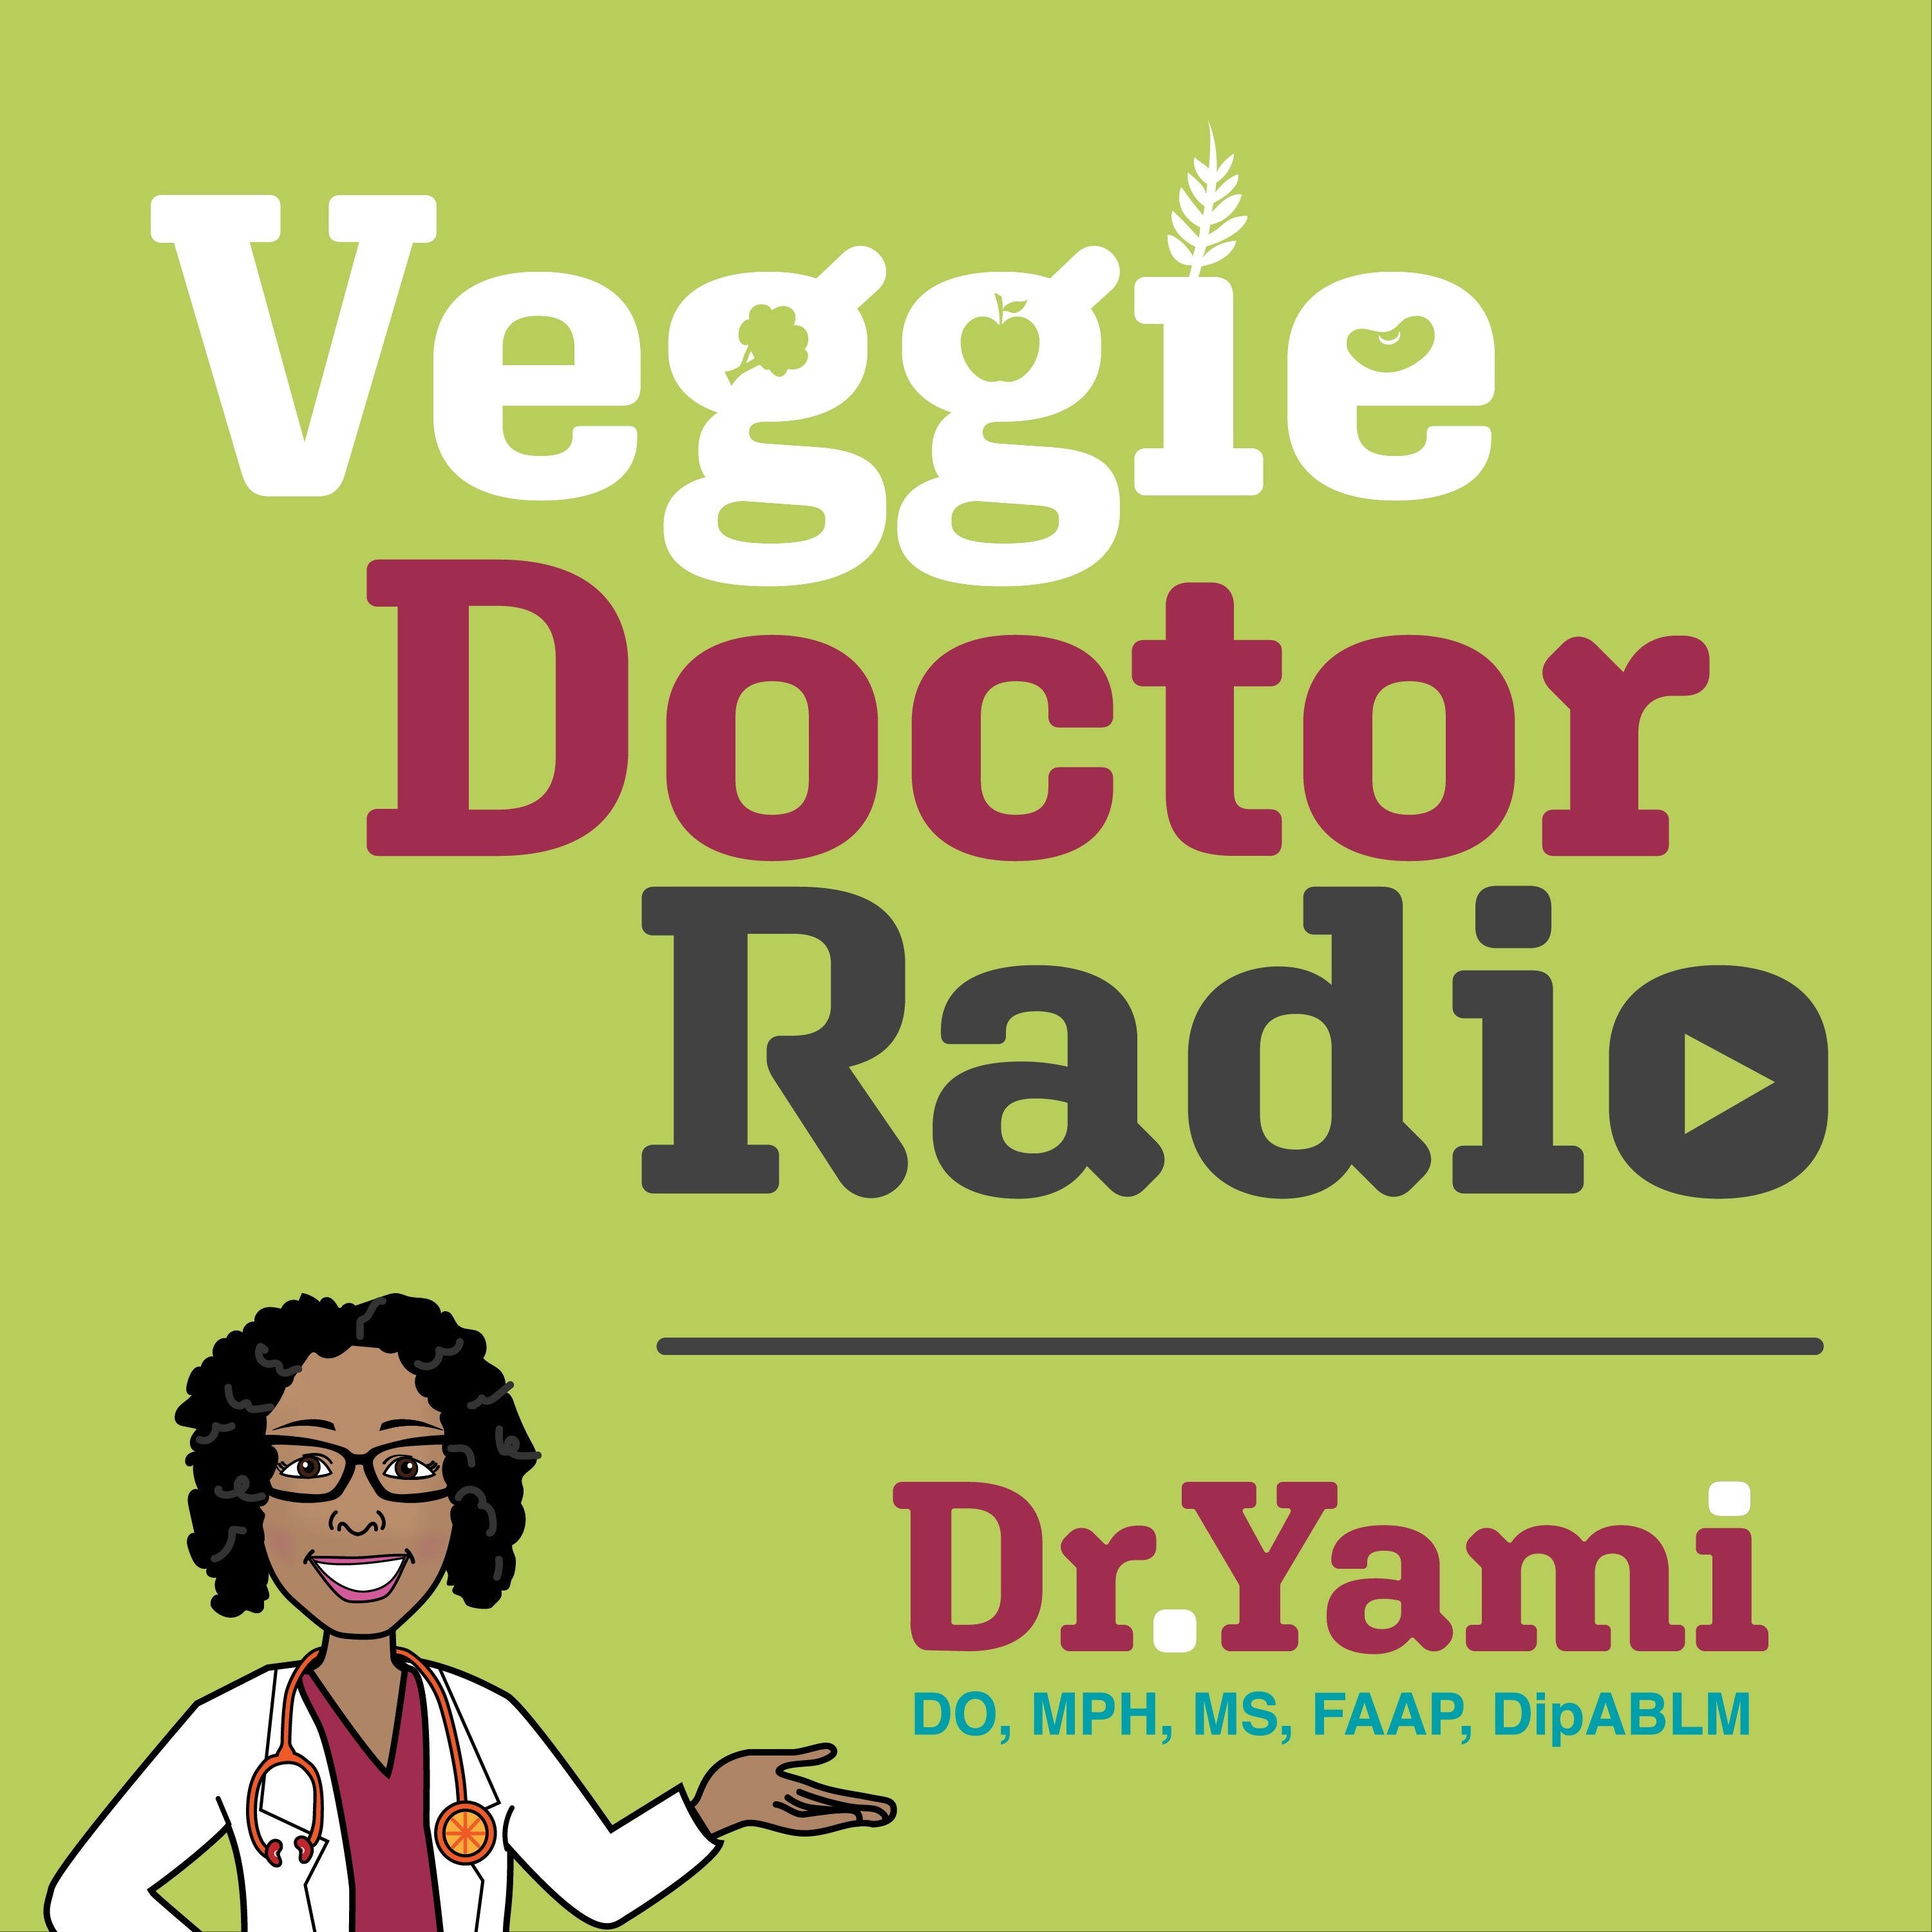 291: Vesanto Melina on her evolution to veganism and how you can be an activist starting today (Veggie Doctor Radio)